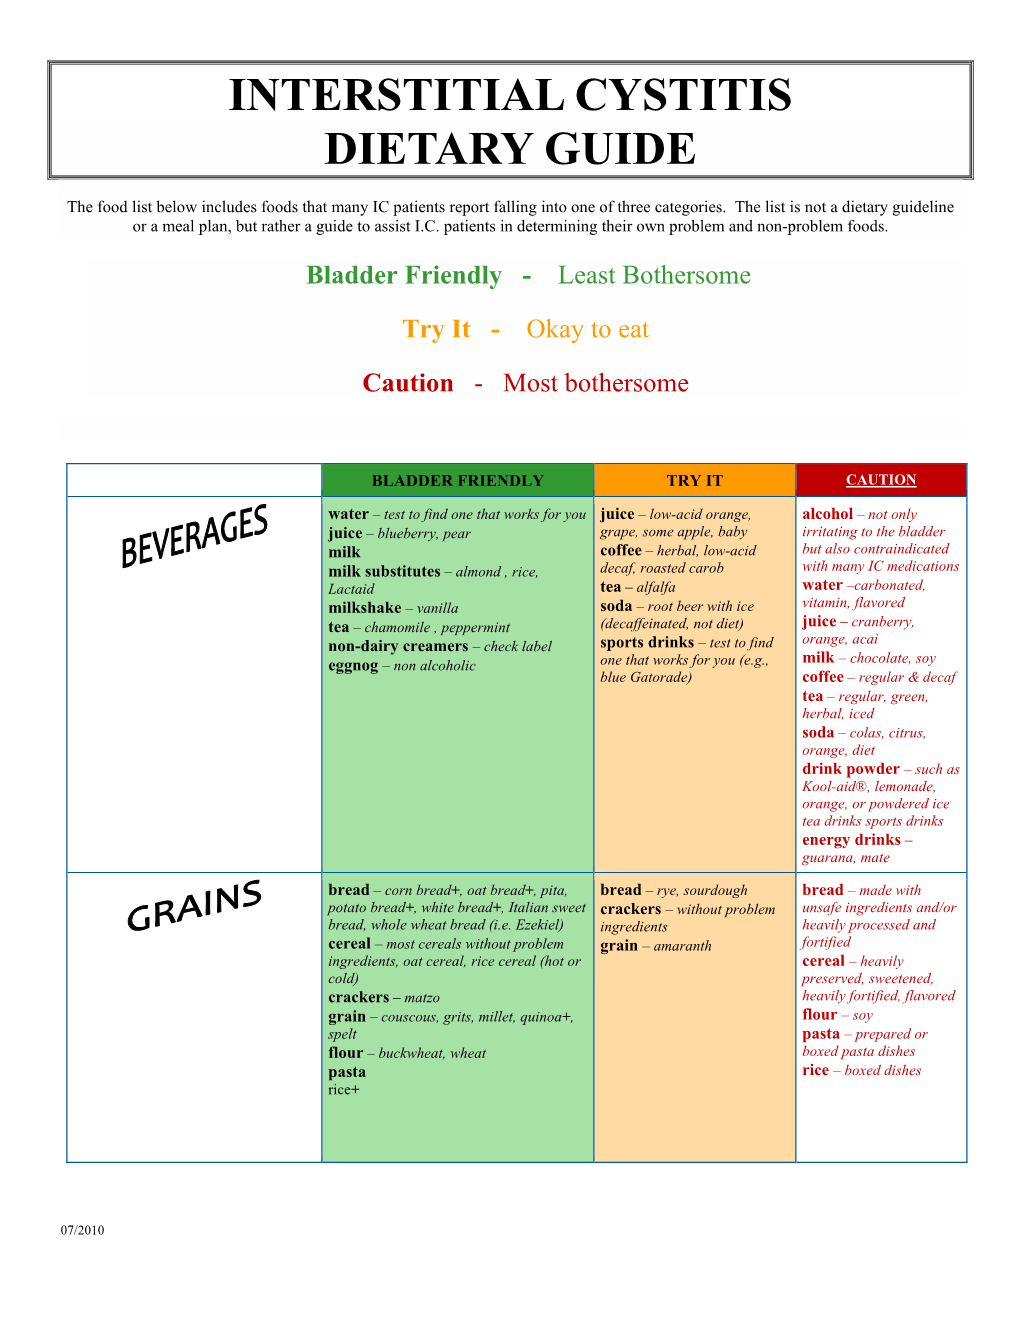 Interstitial Cystitis Dietary Guide